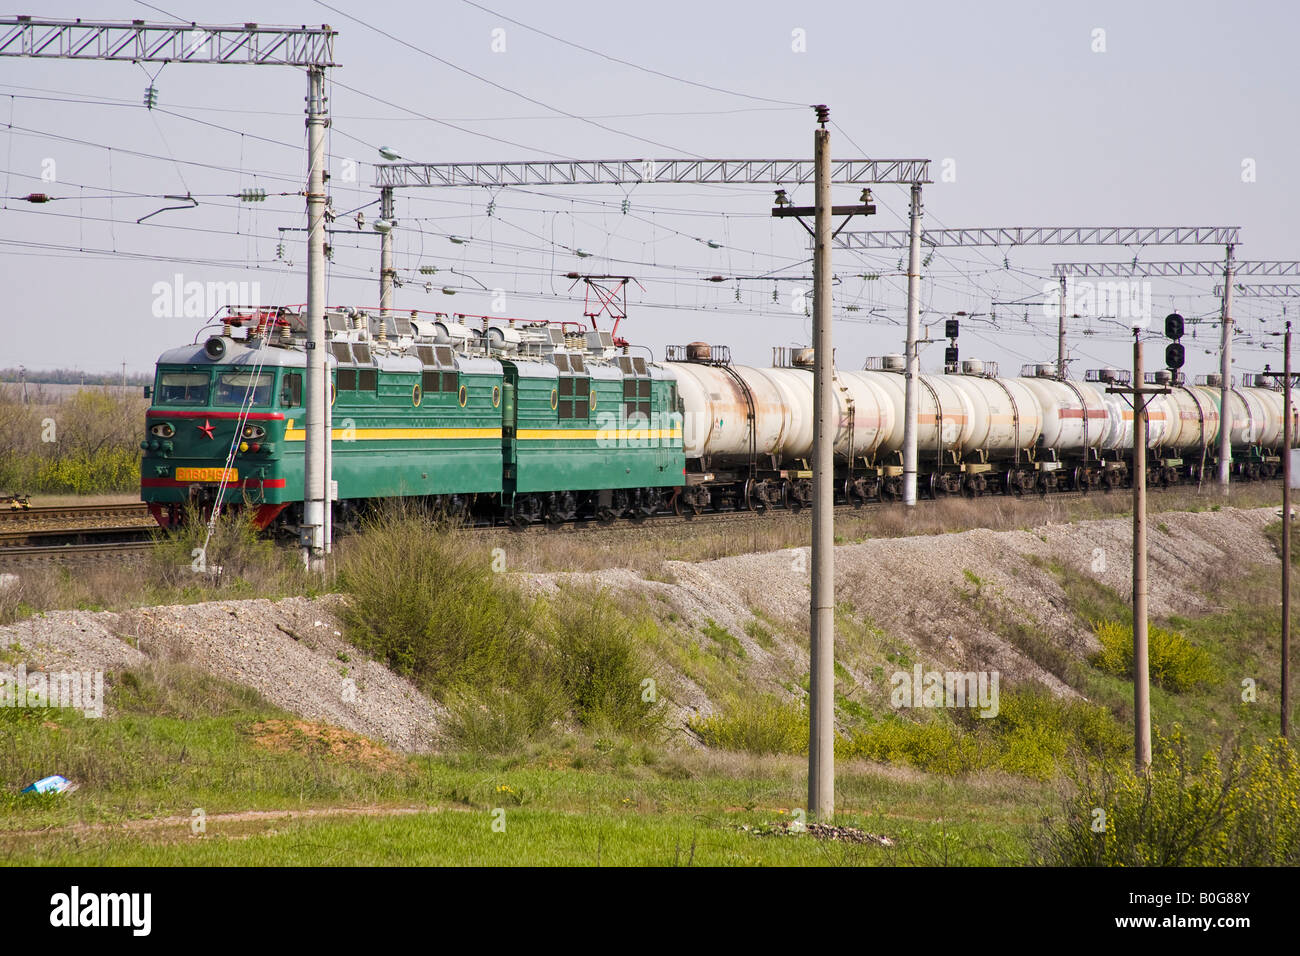 Russian freight train with electric locomotive pulling oil tankers, near Volgograd, Russia, Russian Federation Stock Photo